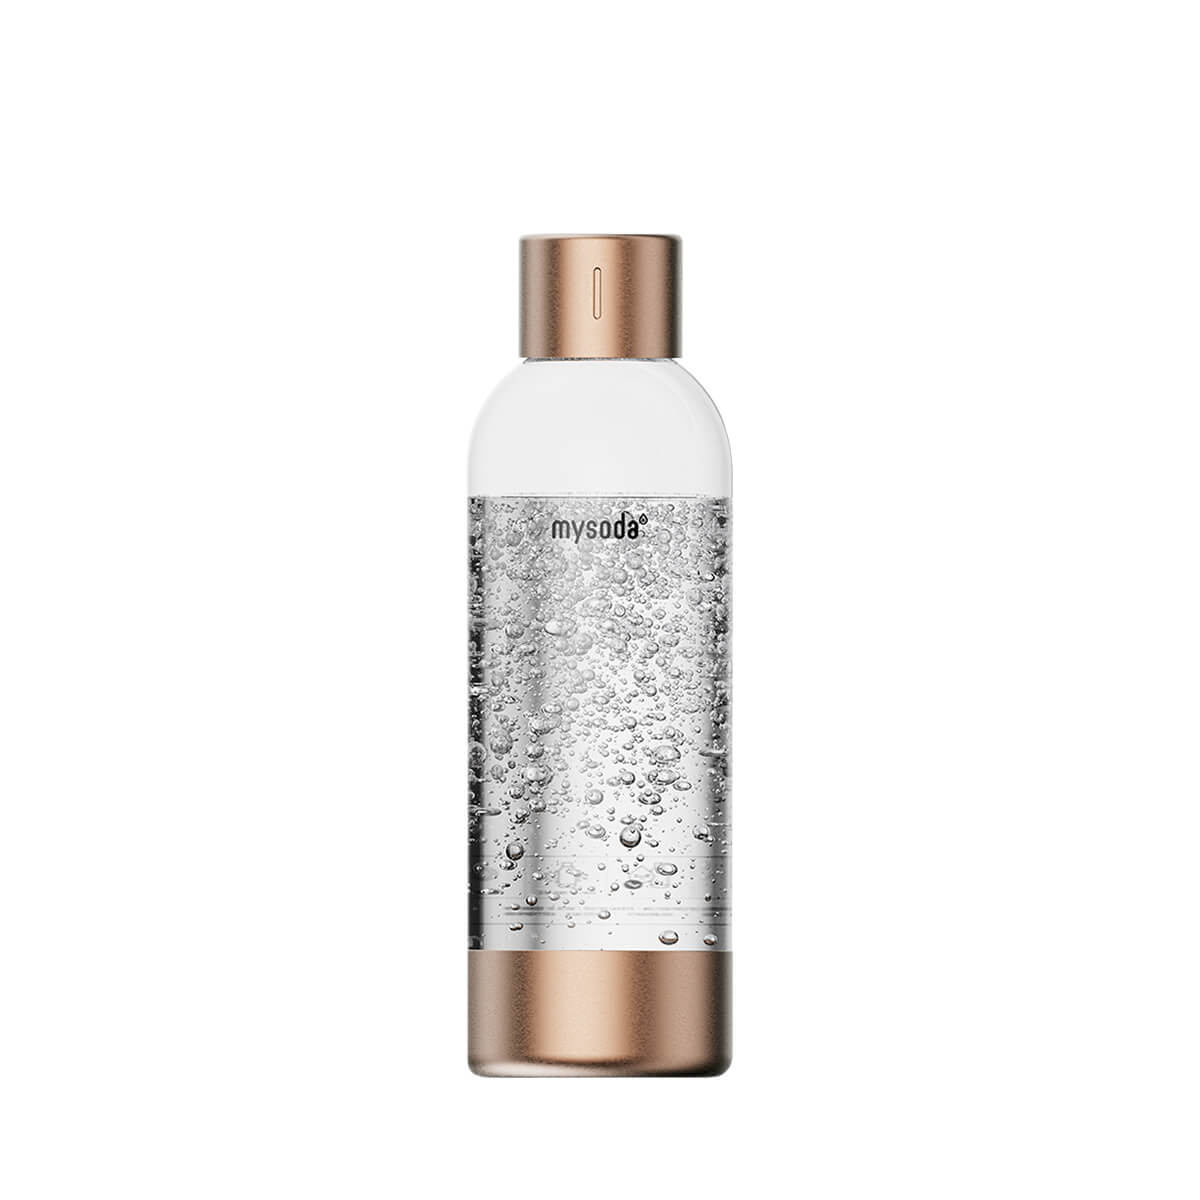 A 1 litre Mysoda premium water bottle with copper-coloured bottom and cap made from aluminium